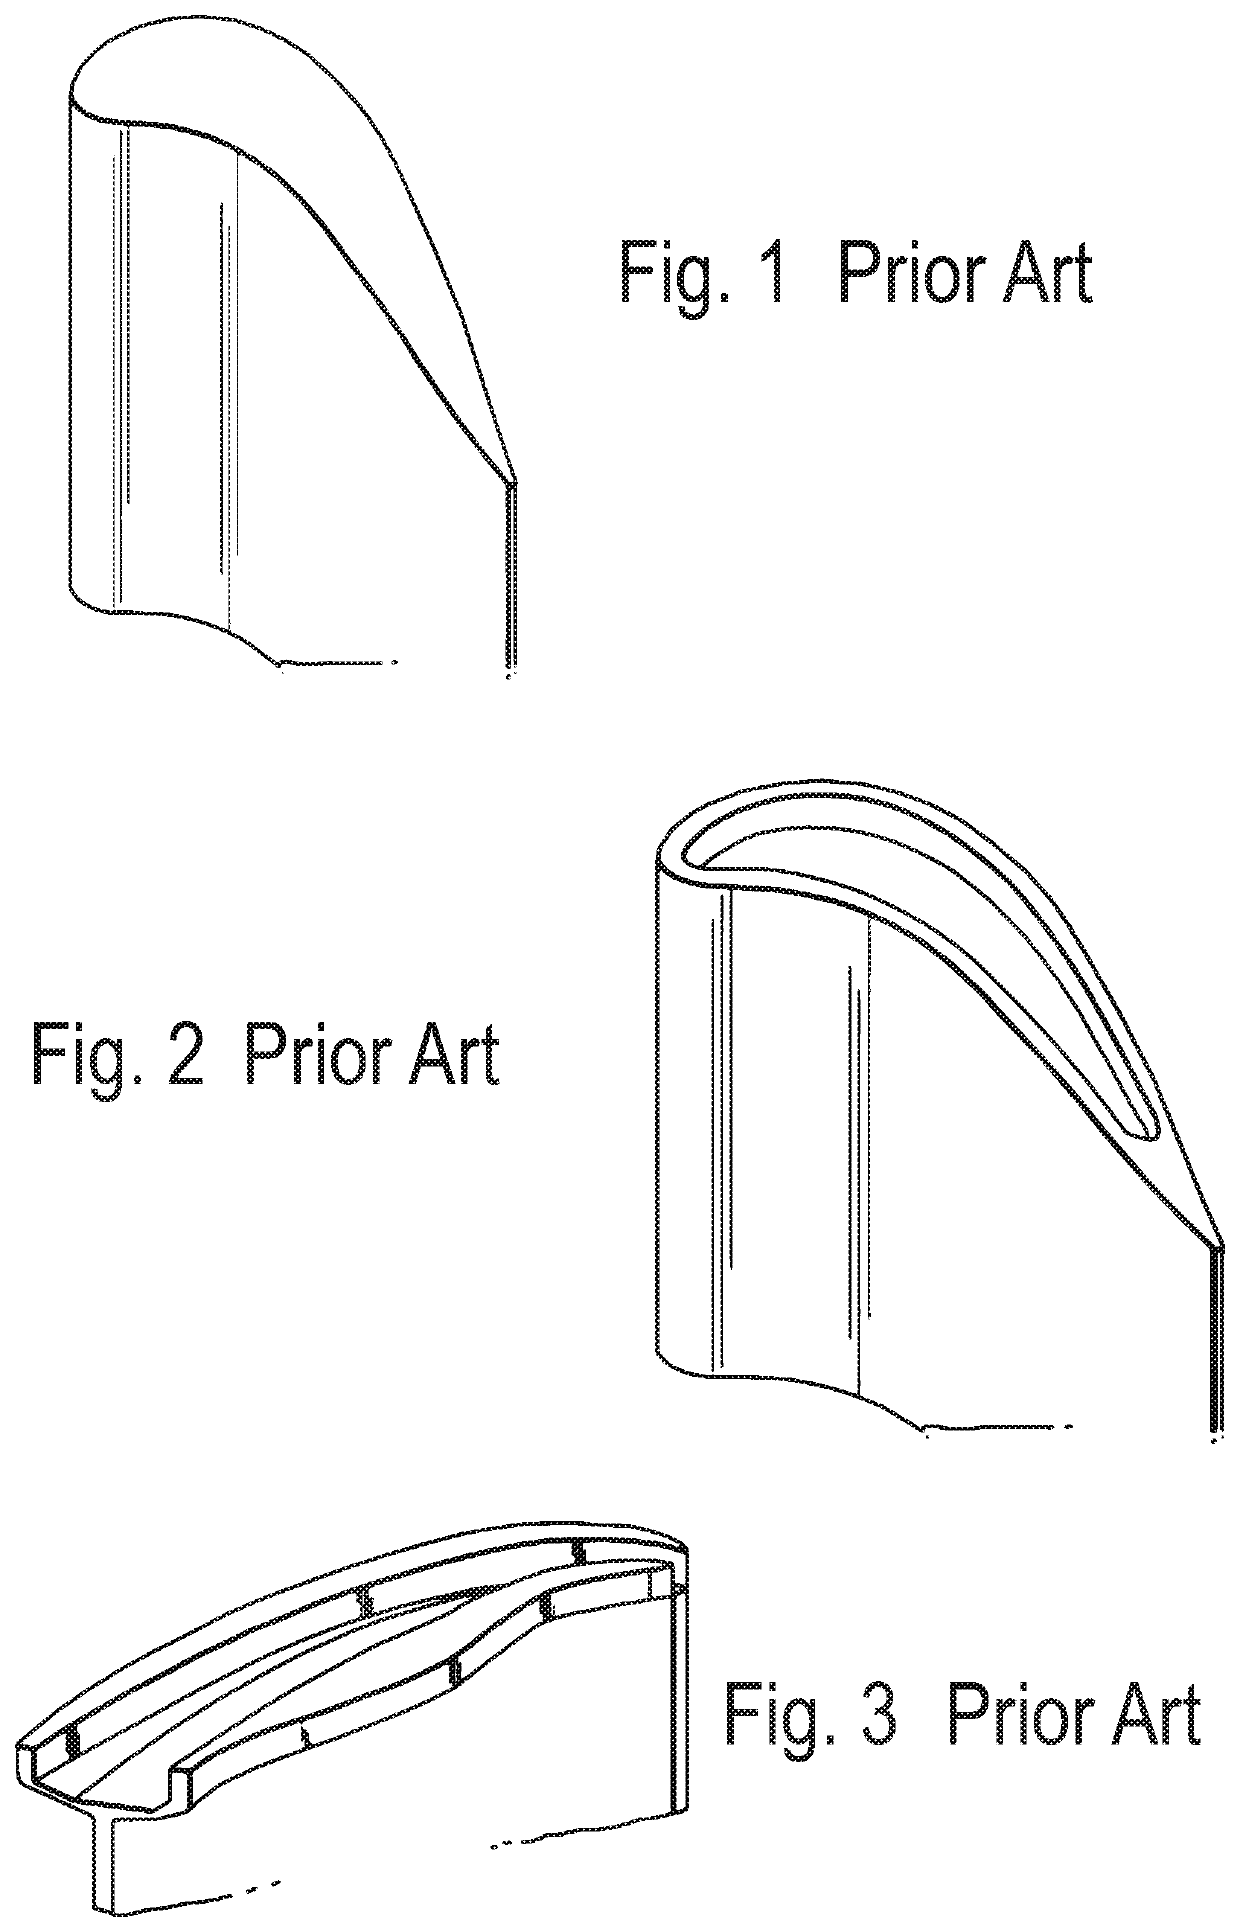 Turbine blade with tip overhang along suction side